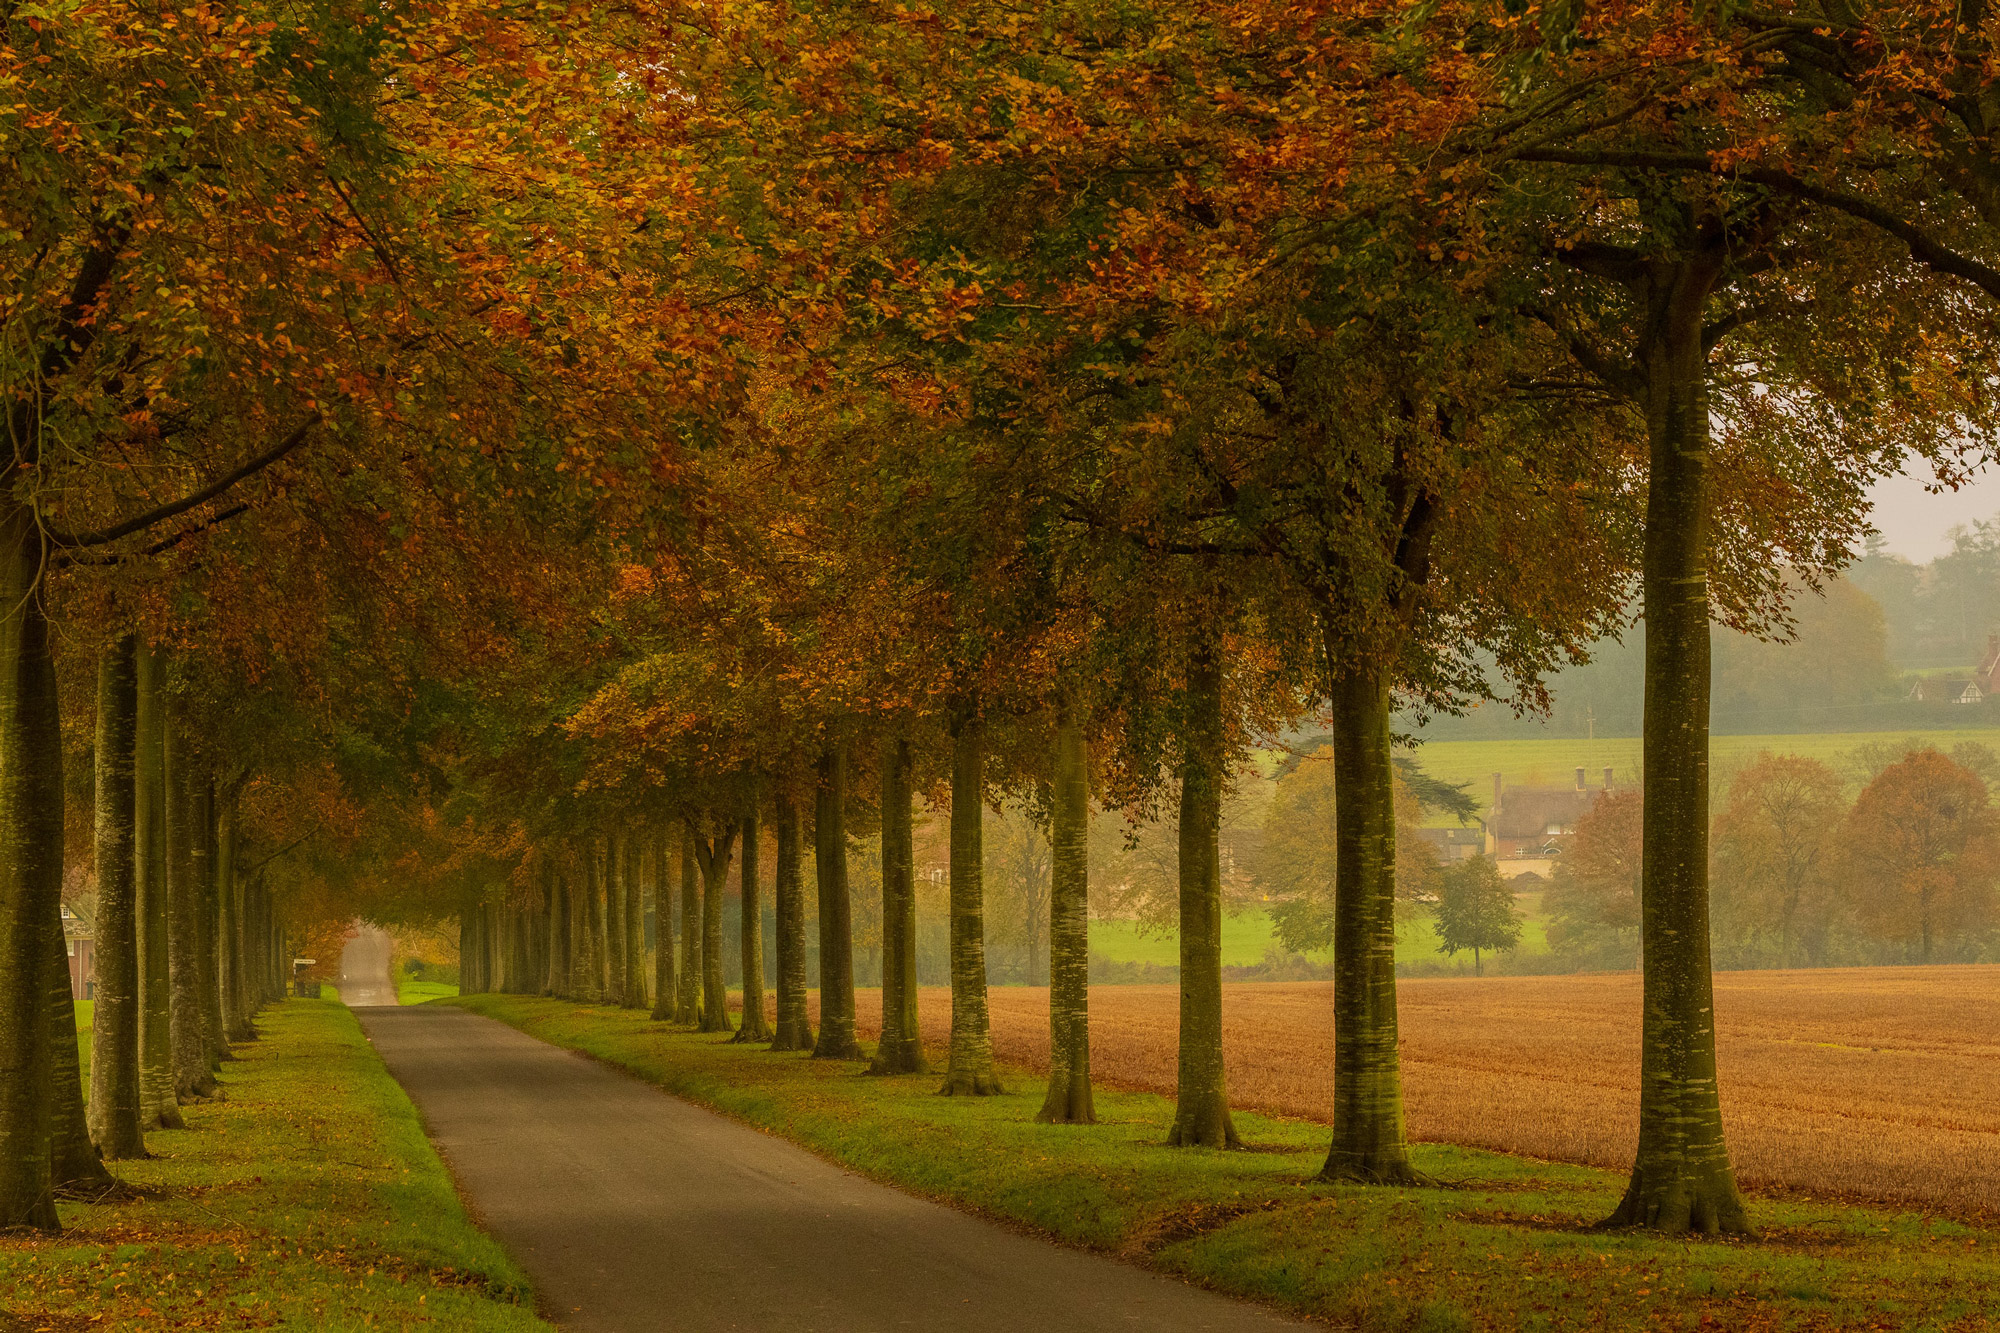 A long driveway lined with autumnal trees.